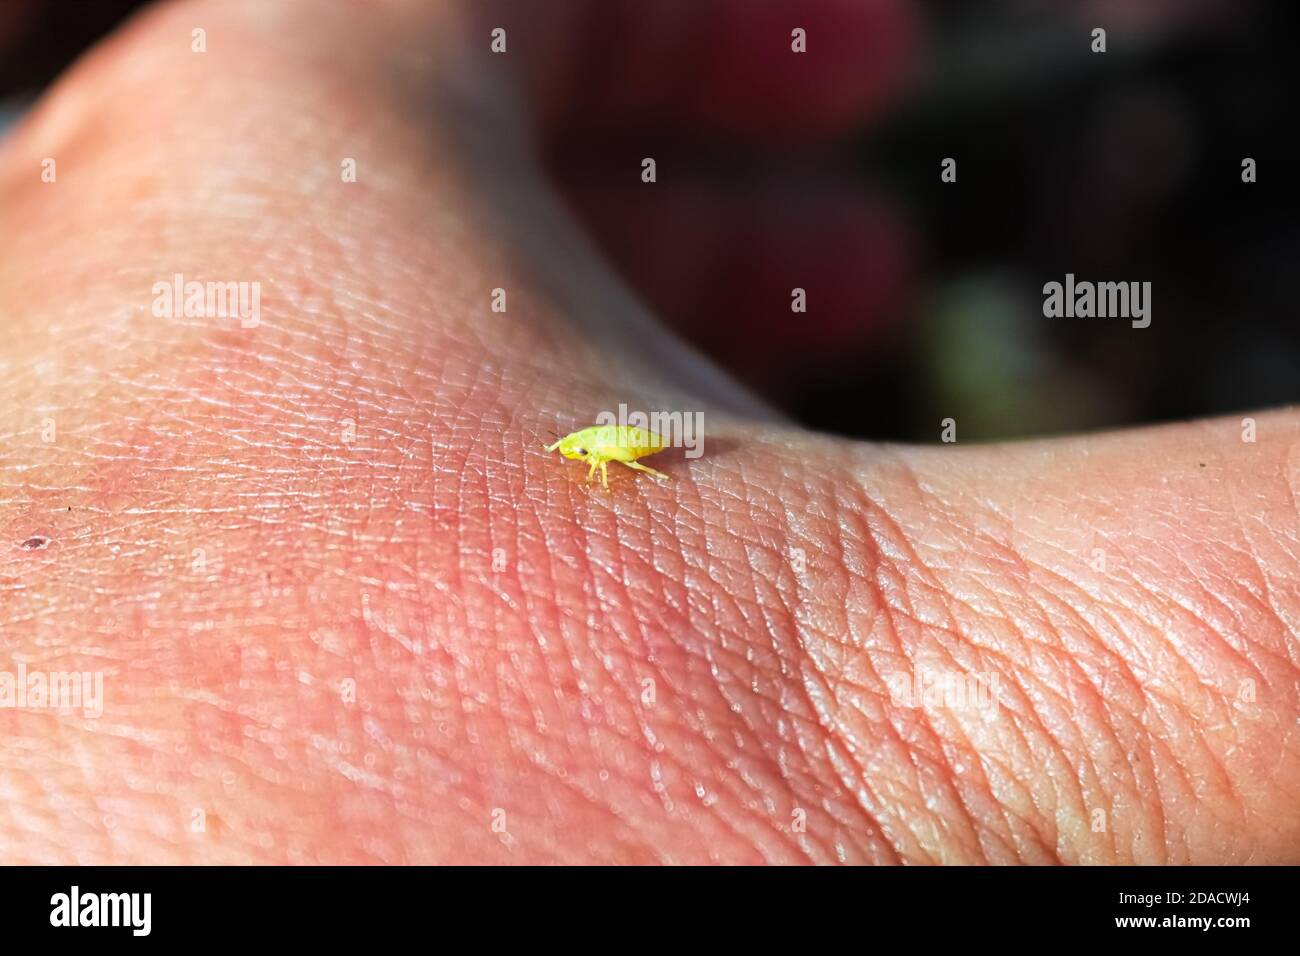 A tiny green spittlebug on the back of a hand Stock Photo